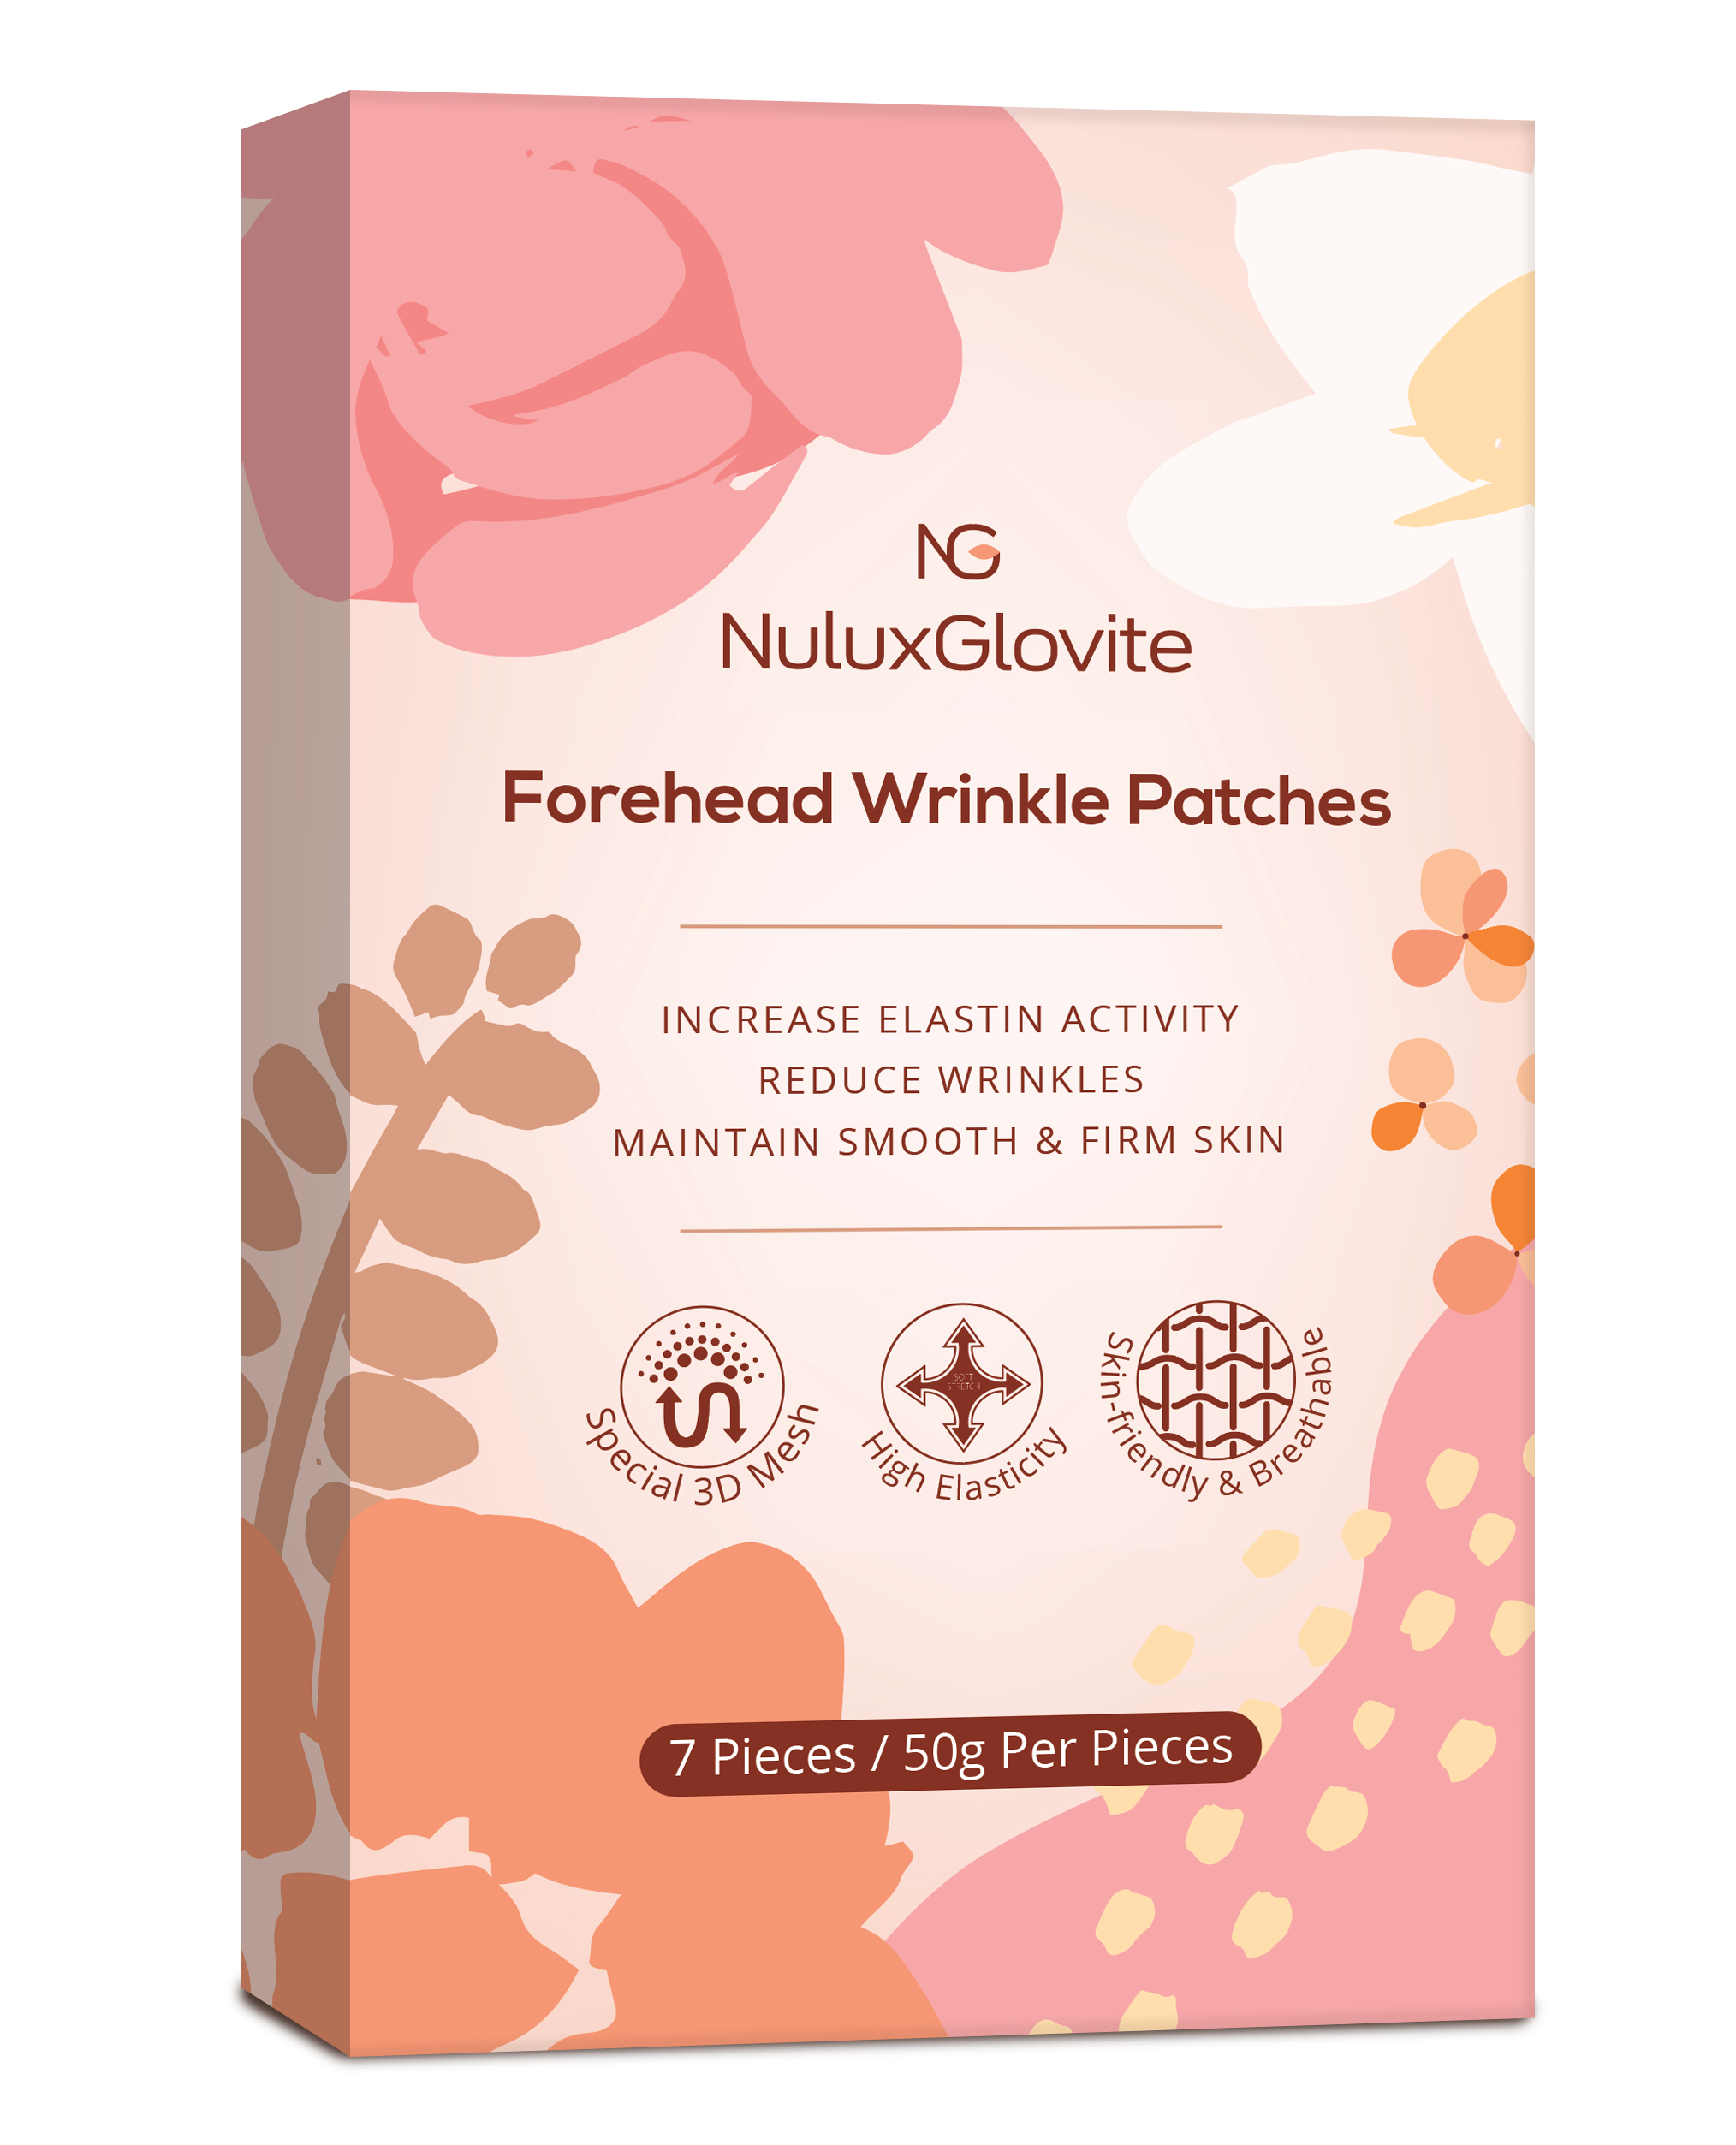 Nuluxglovite Forehead Wrinkle Patches, 7 Packs Forehead and Between Eyes Wrinkle Patches, Anti Wrinkle Patches with Hydrolyzed Collagen, Natural Ingredients Wrinkle Smoothers for Forehead Wrinkles